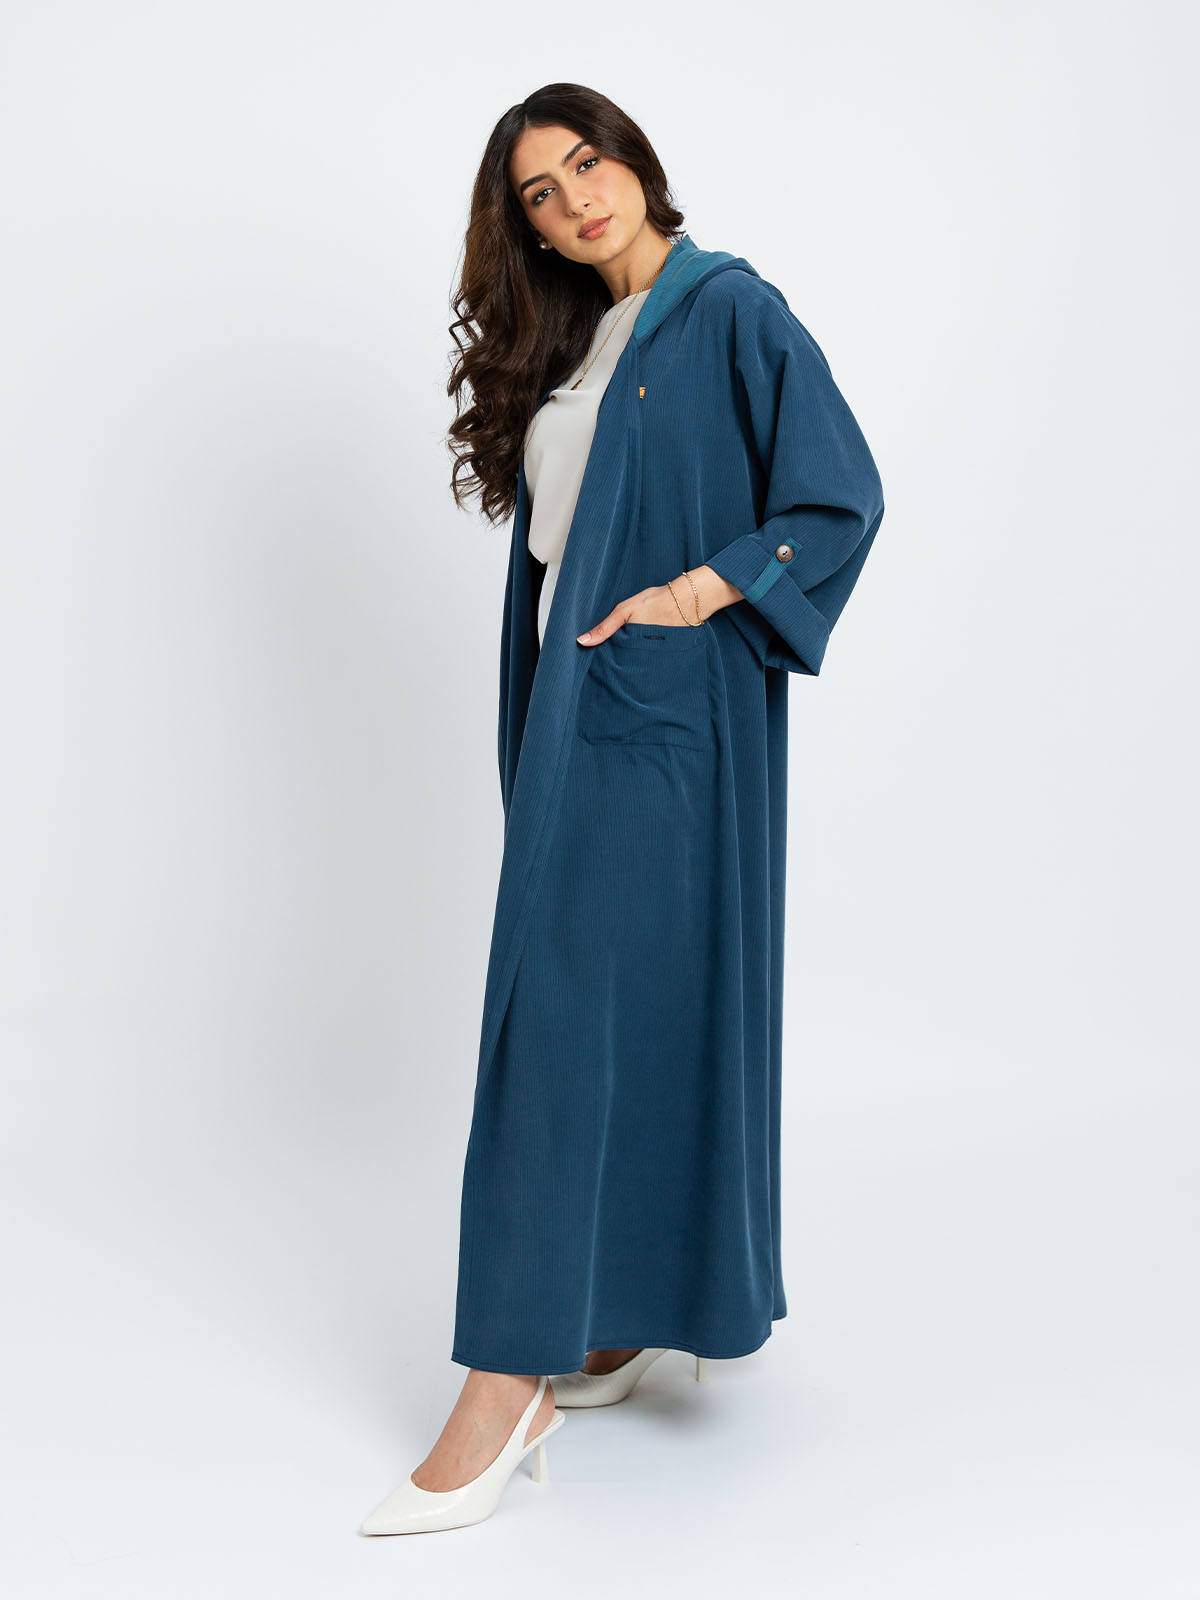 Kaafmeem women clothing navy regular fit long abaya with hoodie in soft fabric for everyday outings